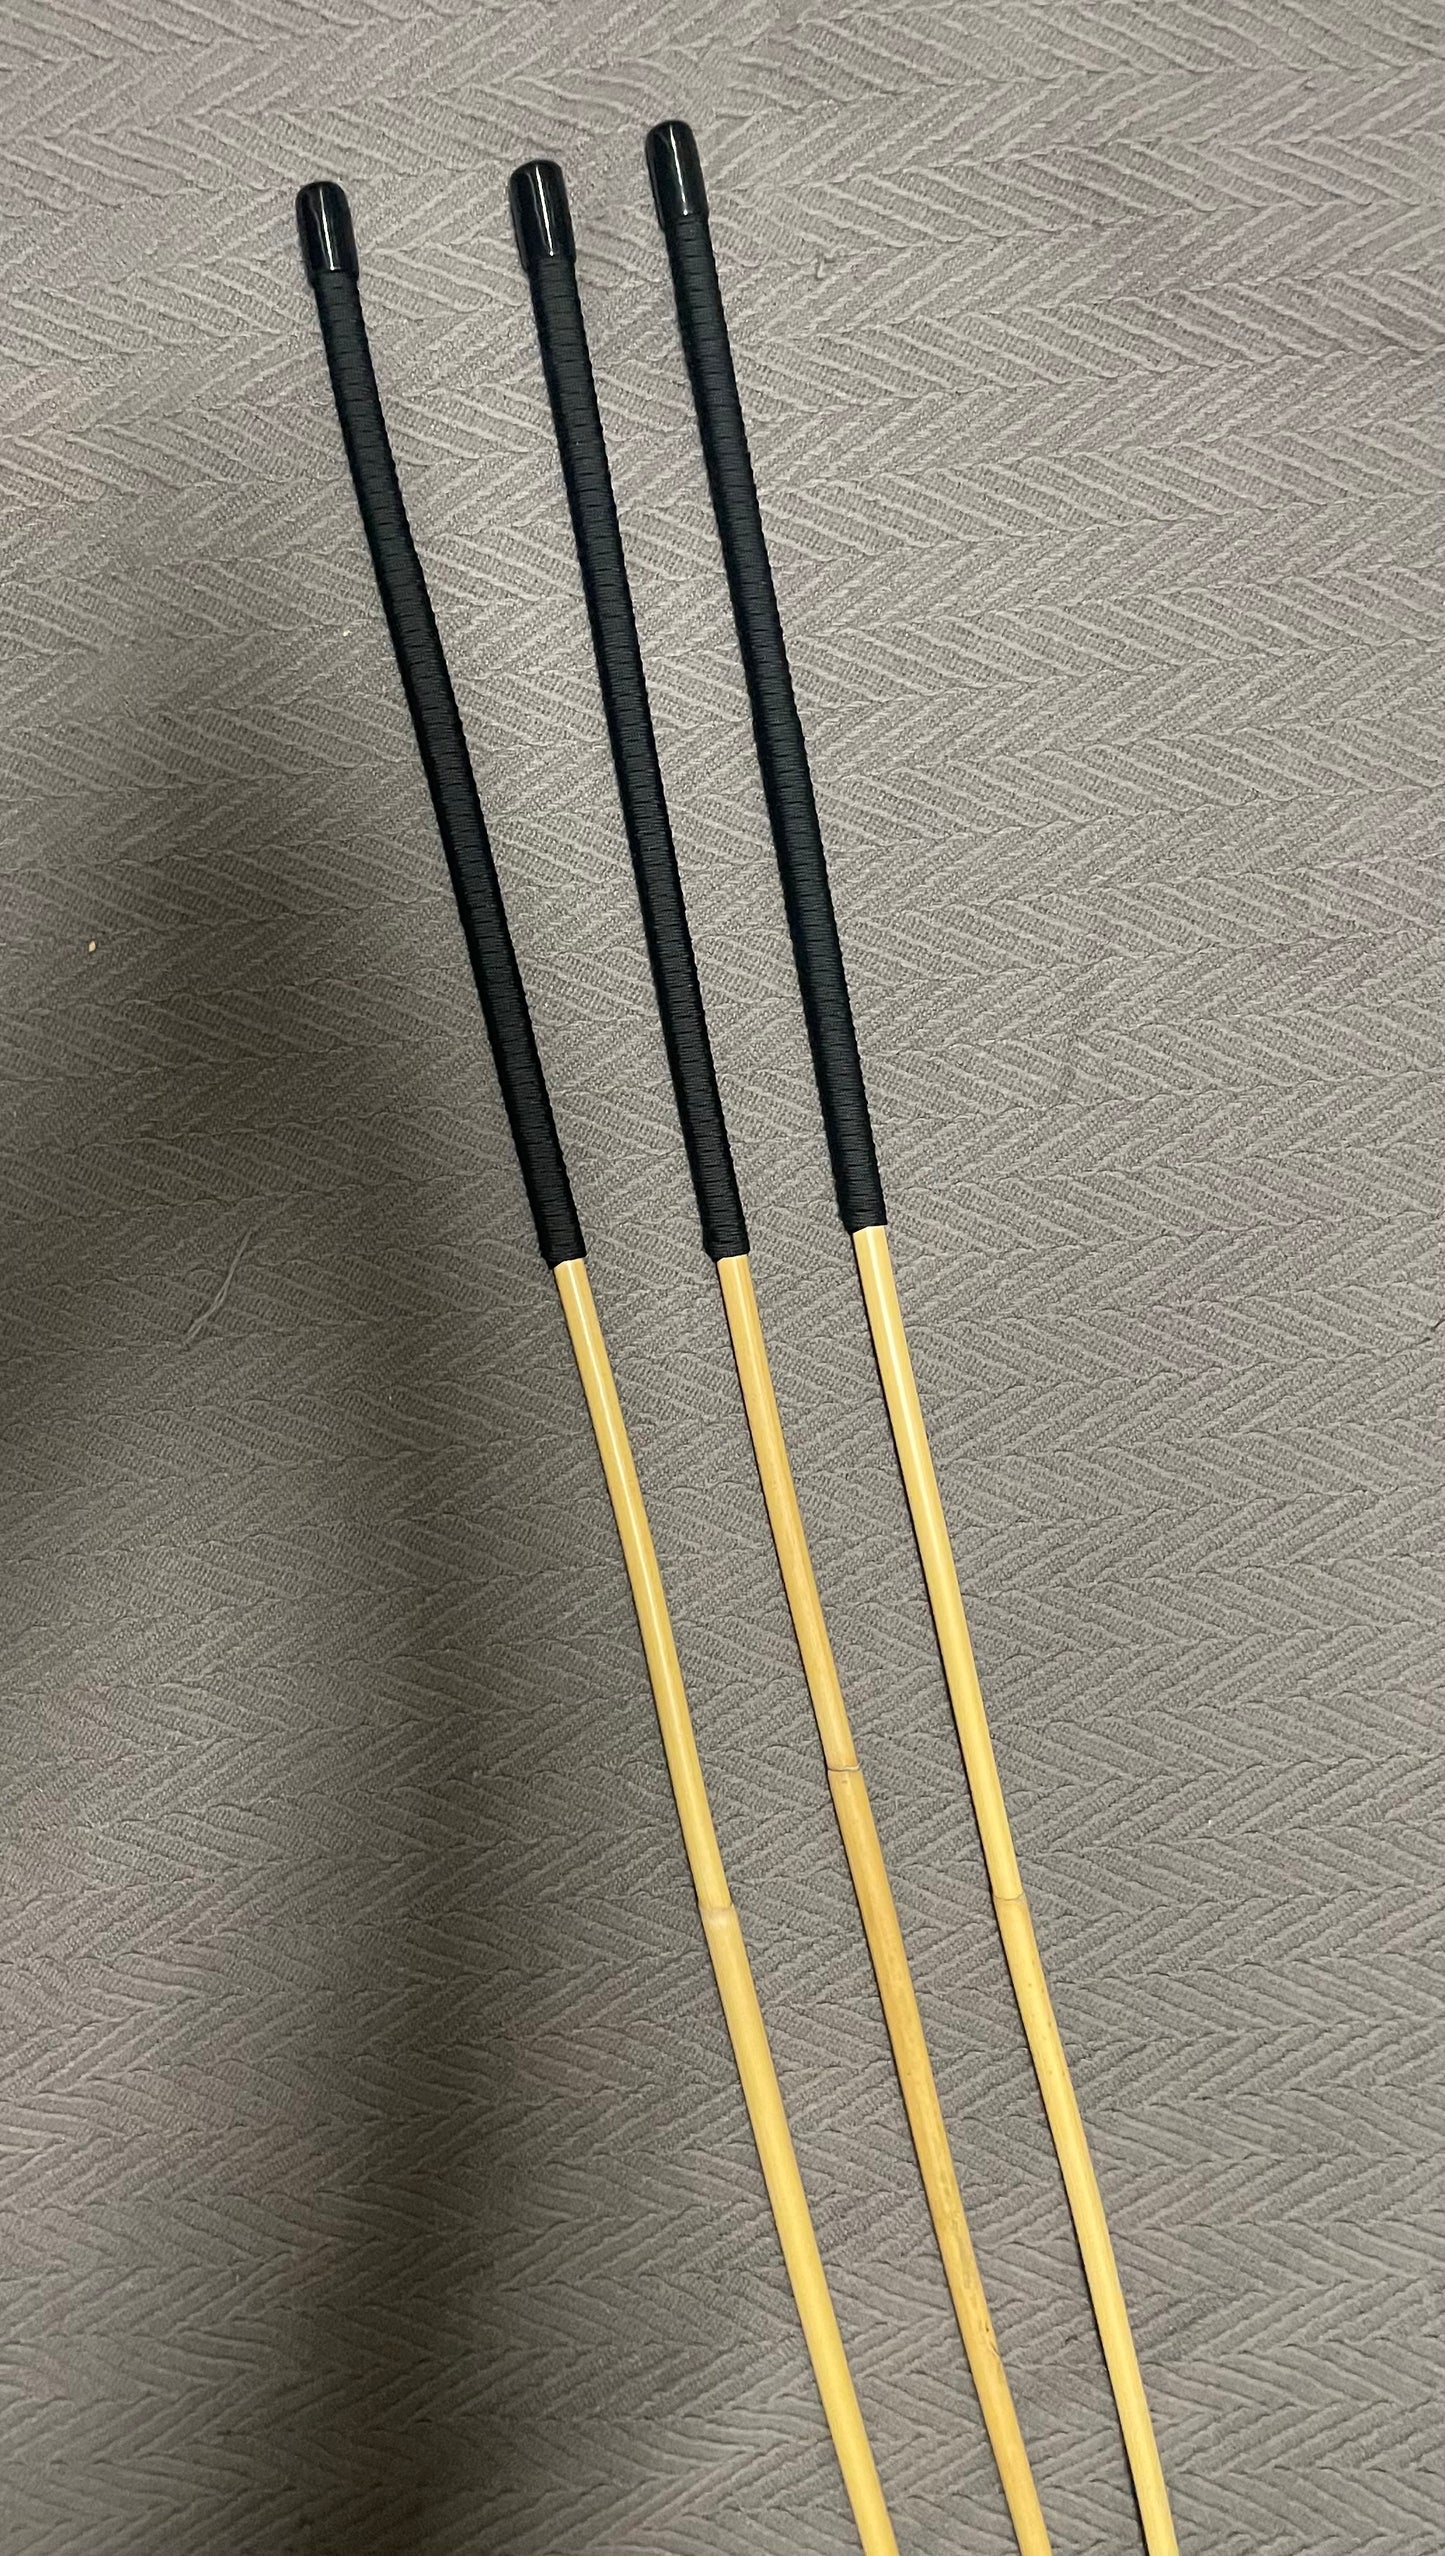 Set of 3 Classic Dragon Canes / School Canes  with 14" Black Paracord Handles  - 95  cms L & 9.5 - 11 mm D - Englishvice Canes